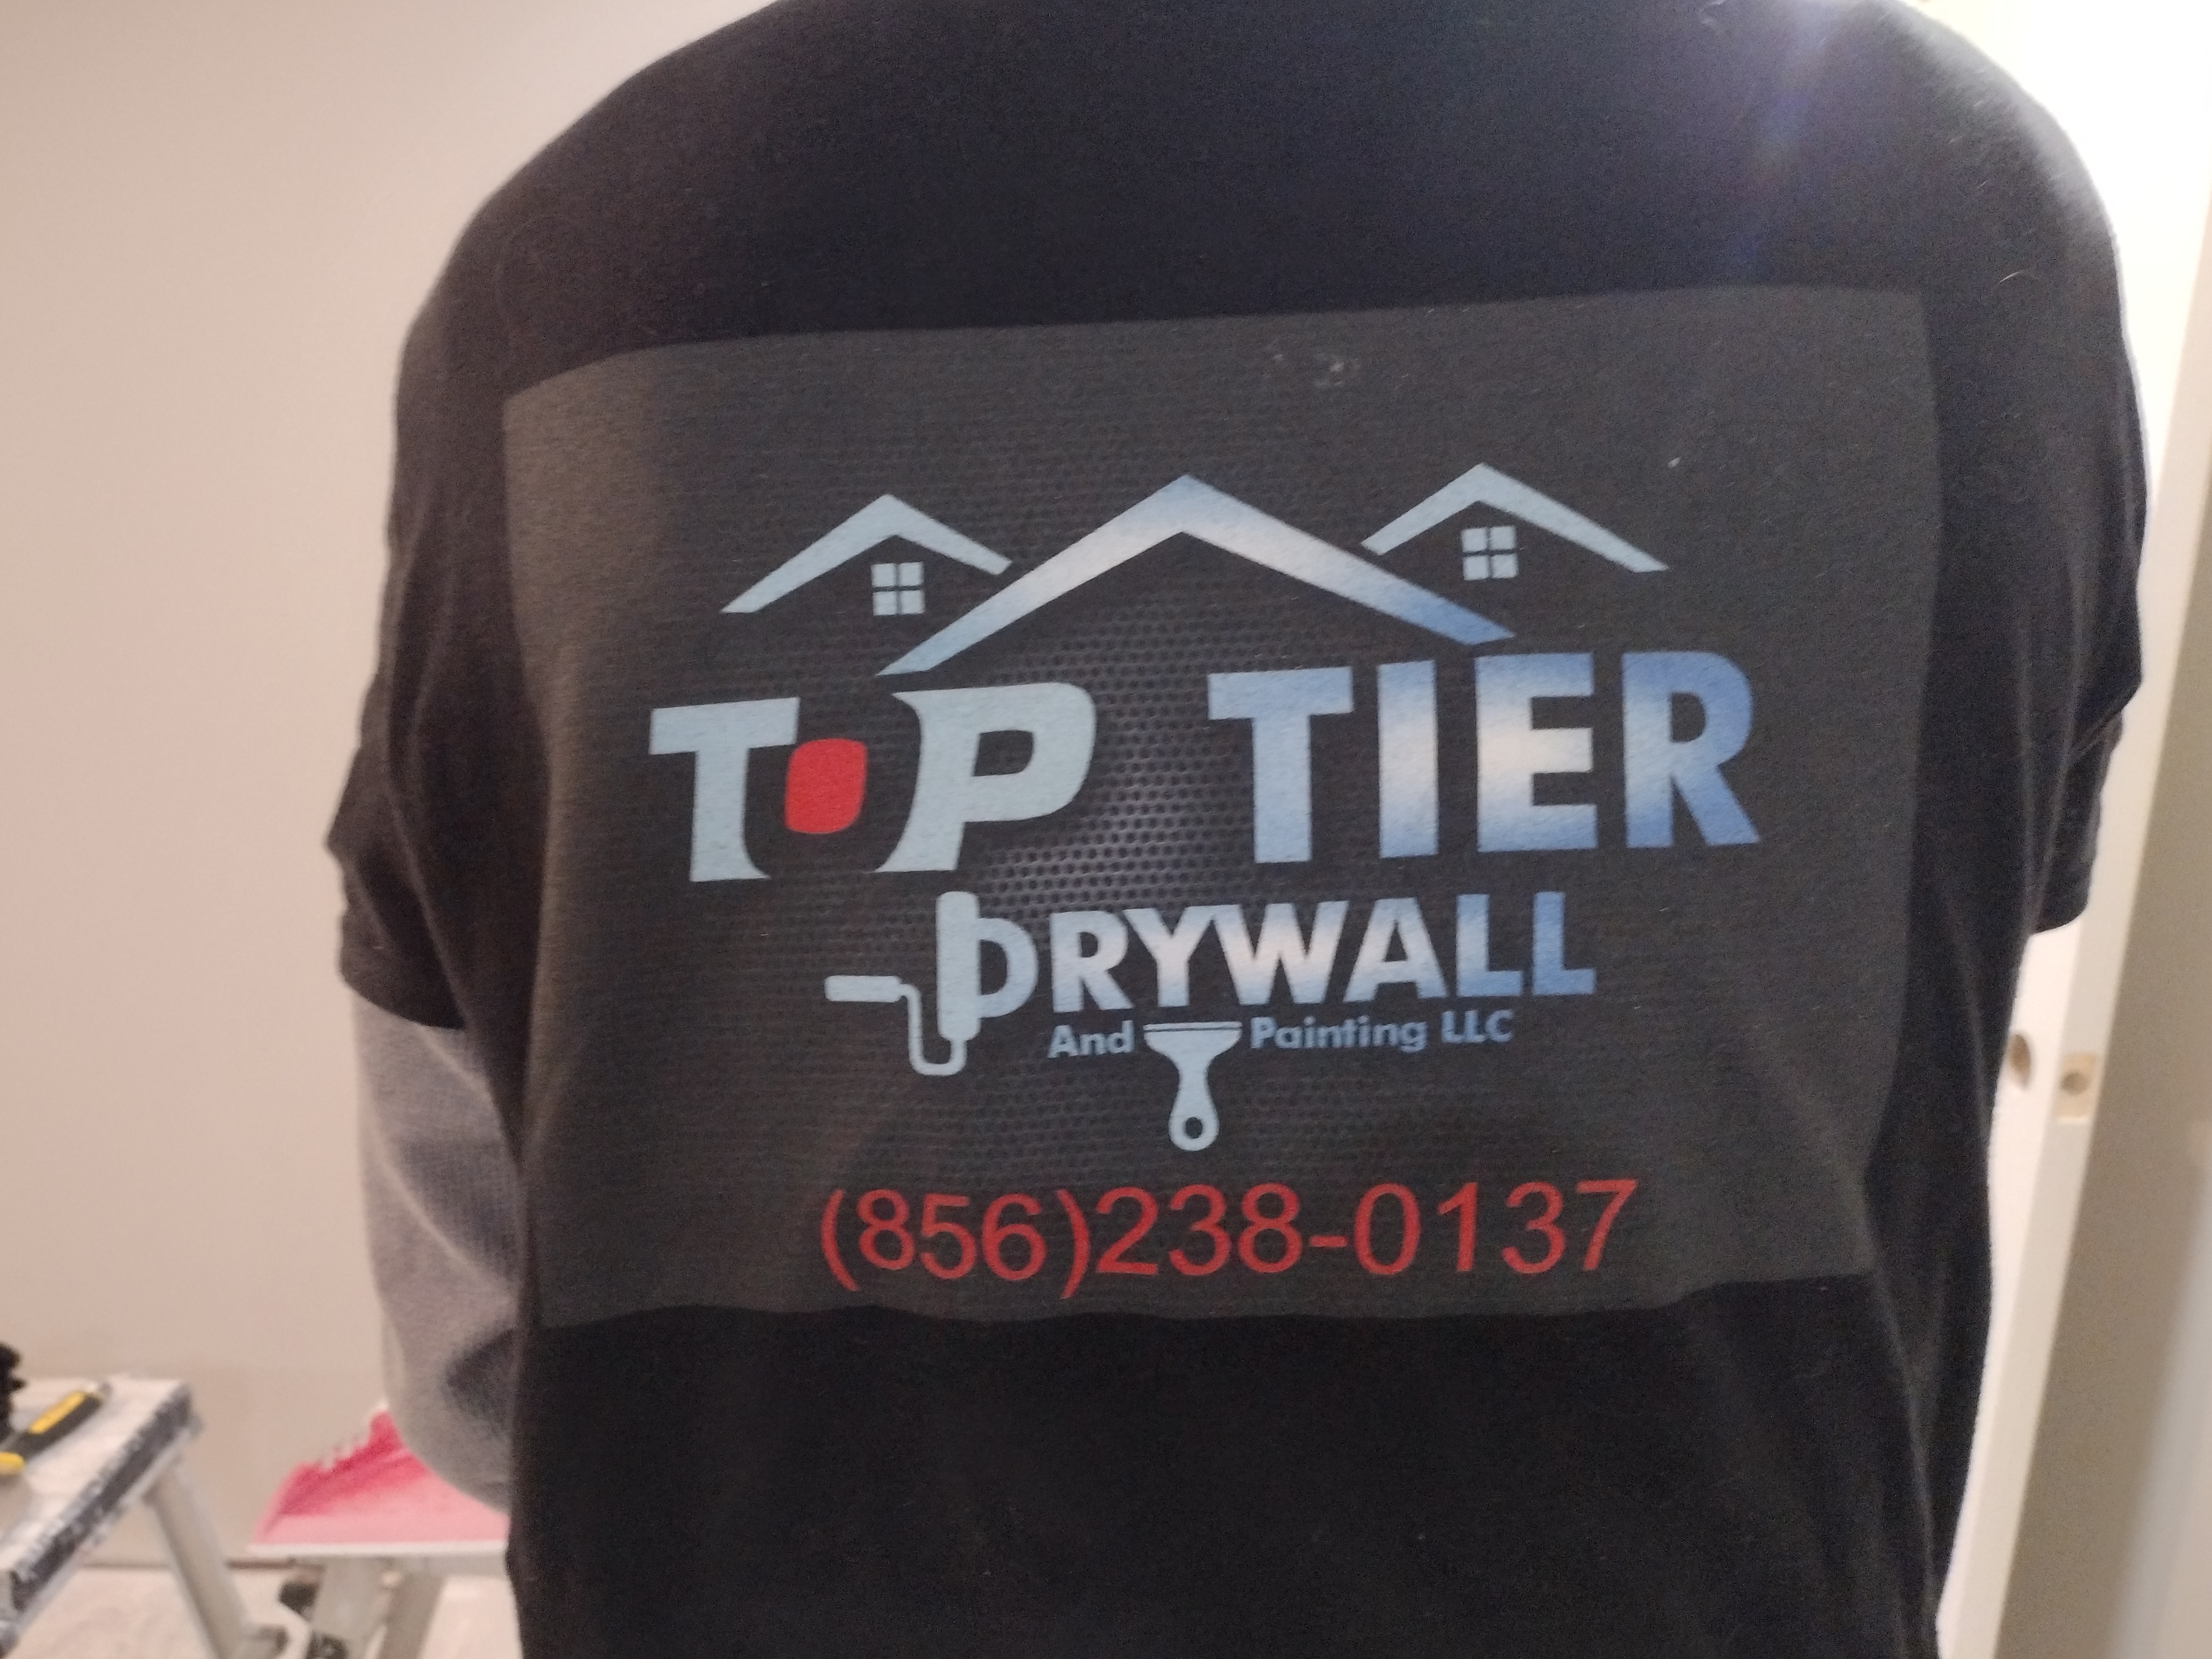 Top Tier Drywall And Painting LLC Logo